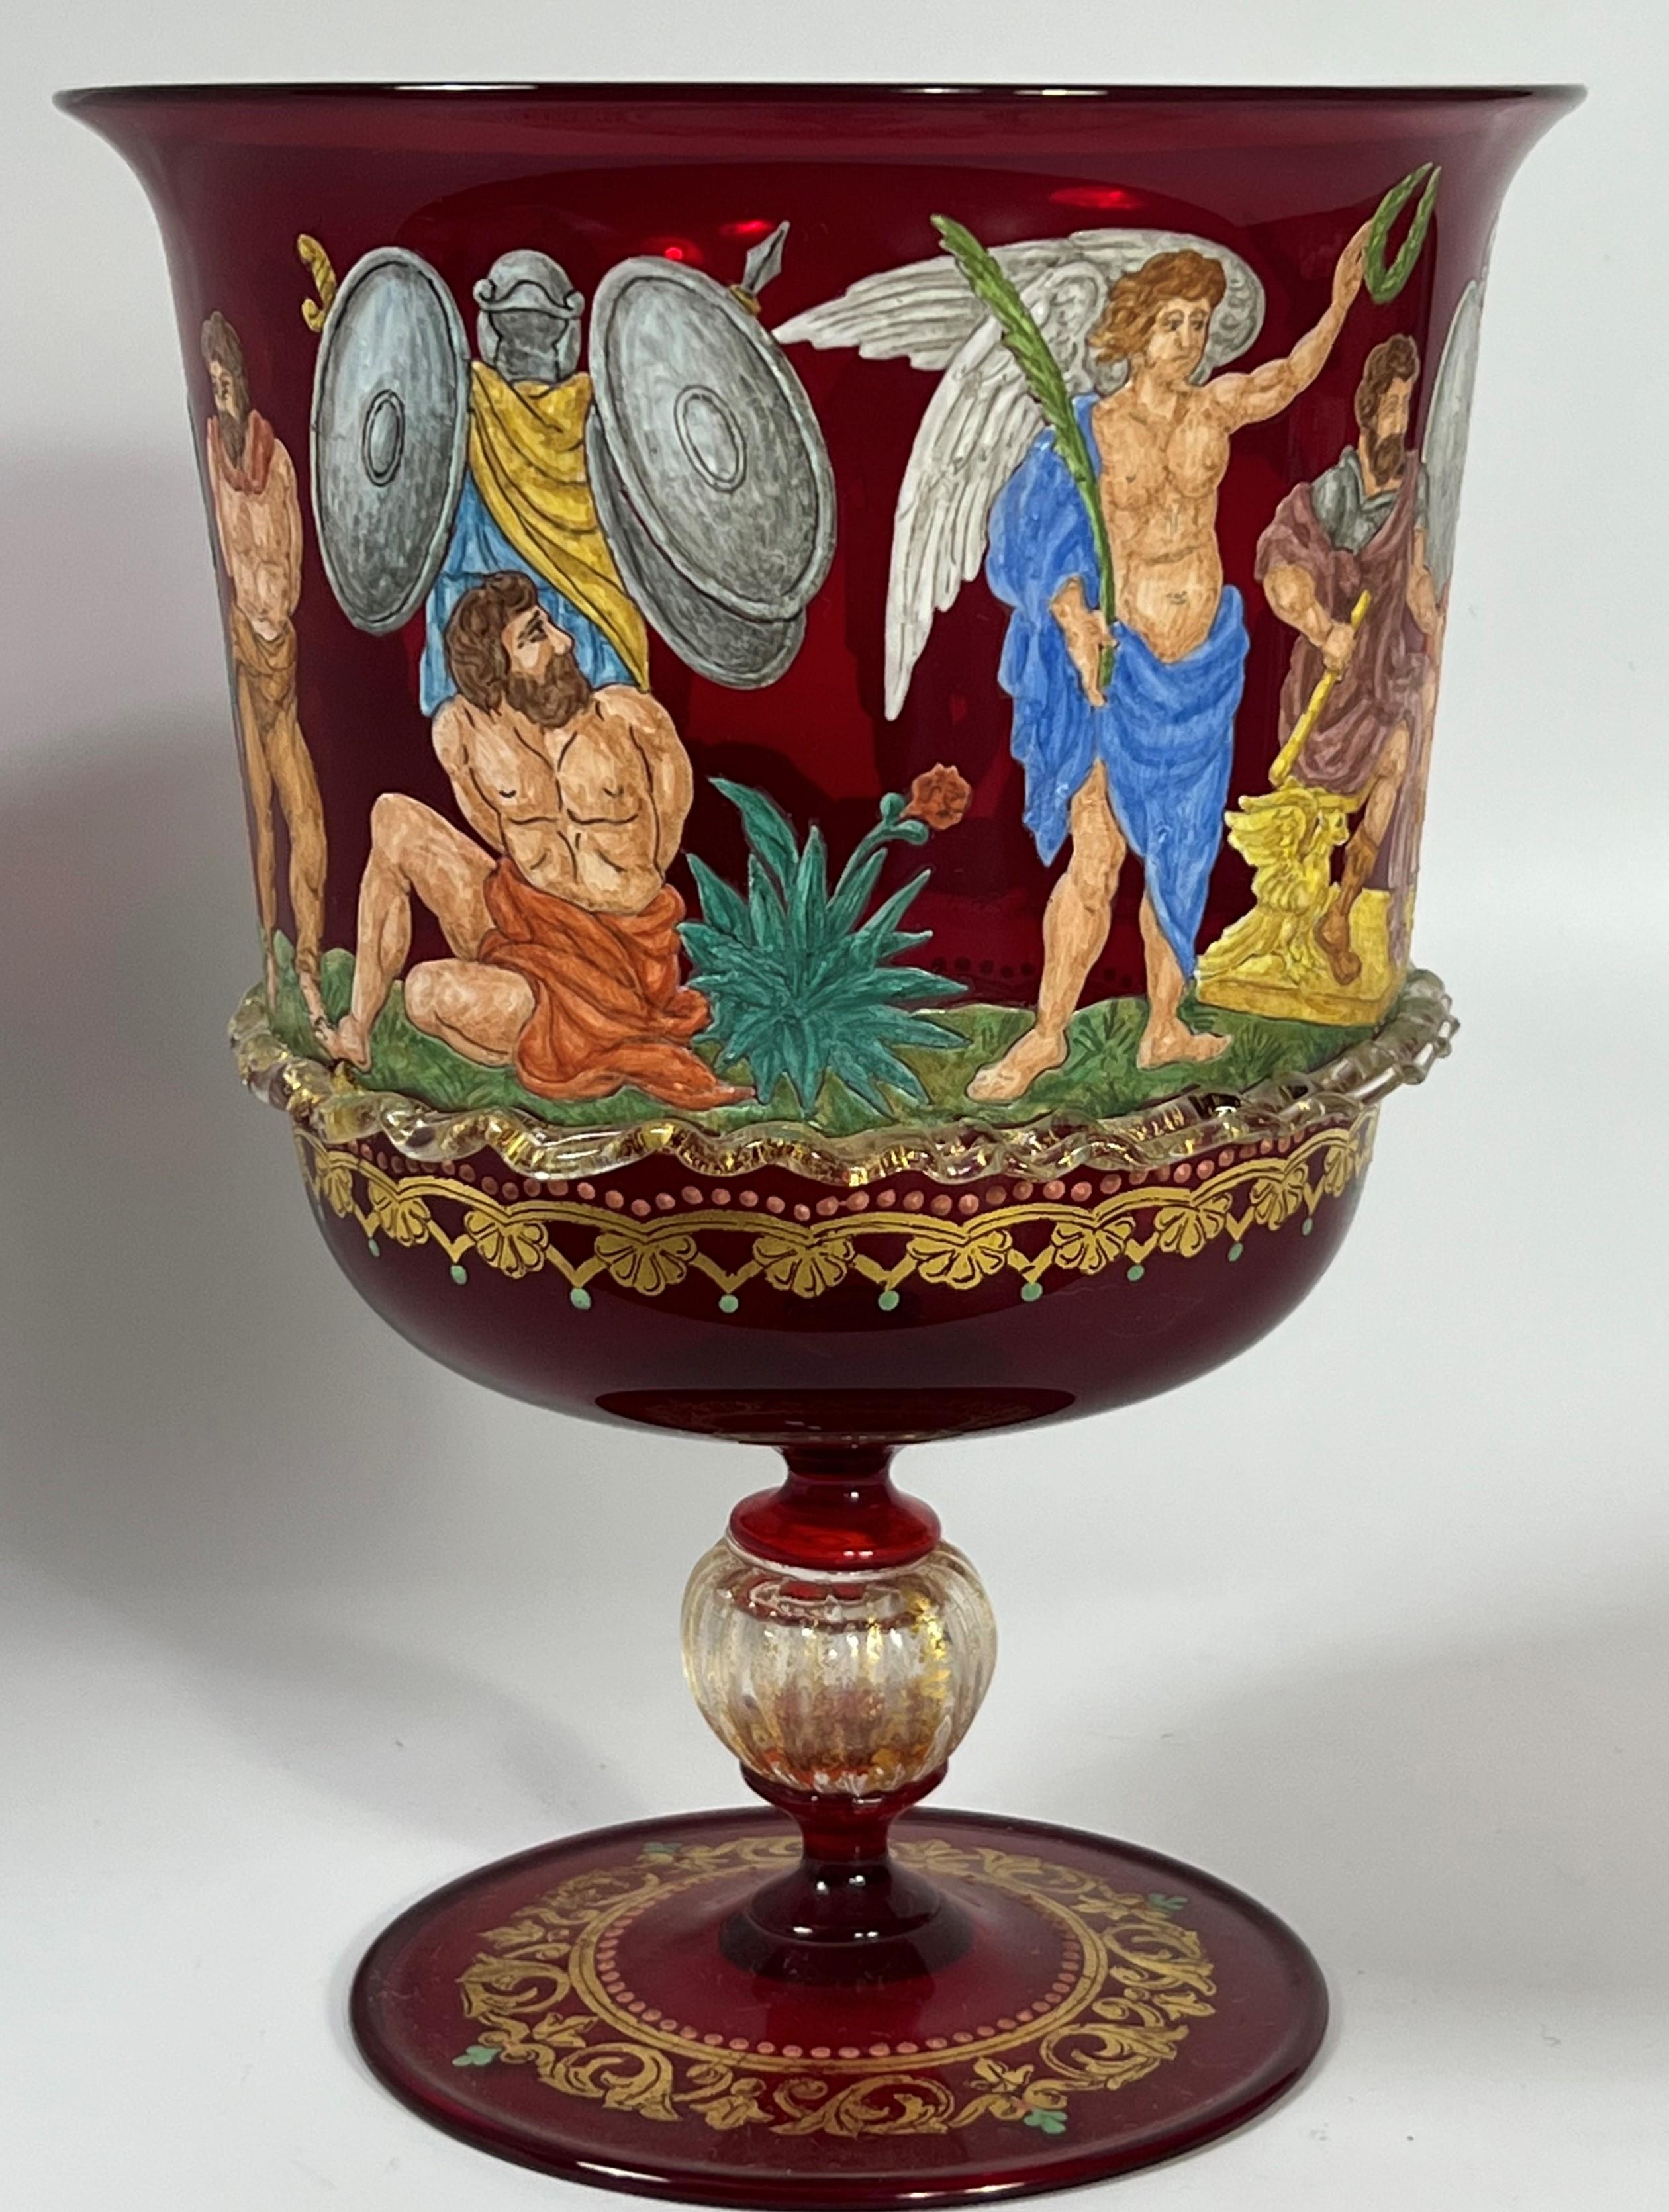 This chalice features a post battle enamel painted scene with a laural being placed upon the seated victor and a man pleads for mercy on behalf of defeated warriors and a family.  The quality of the Renaissance style painted enamel and depth of